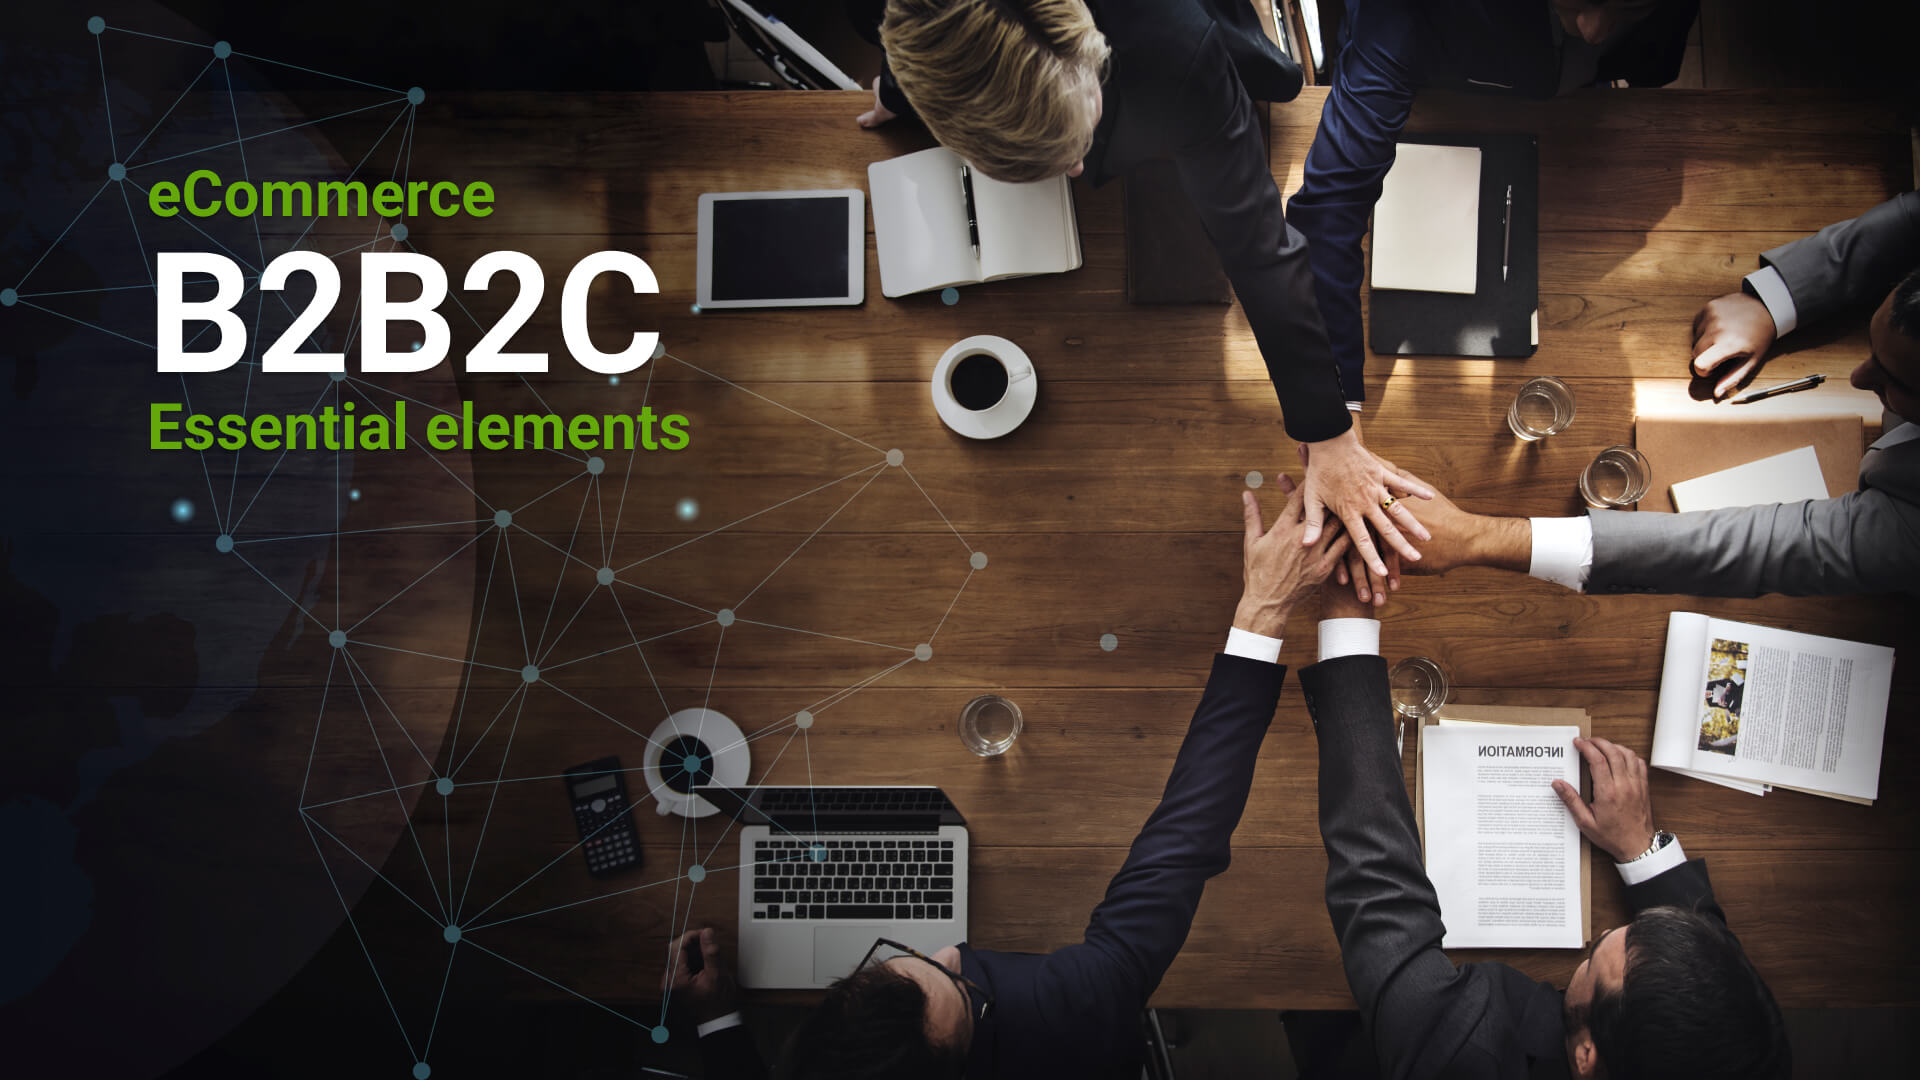 B2B2C business: essential elements to implement the model in your company